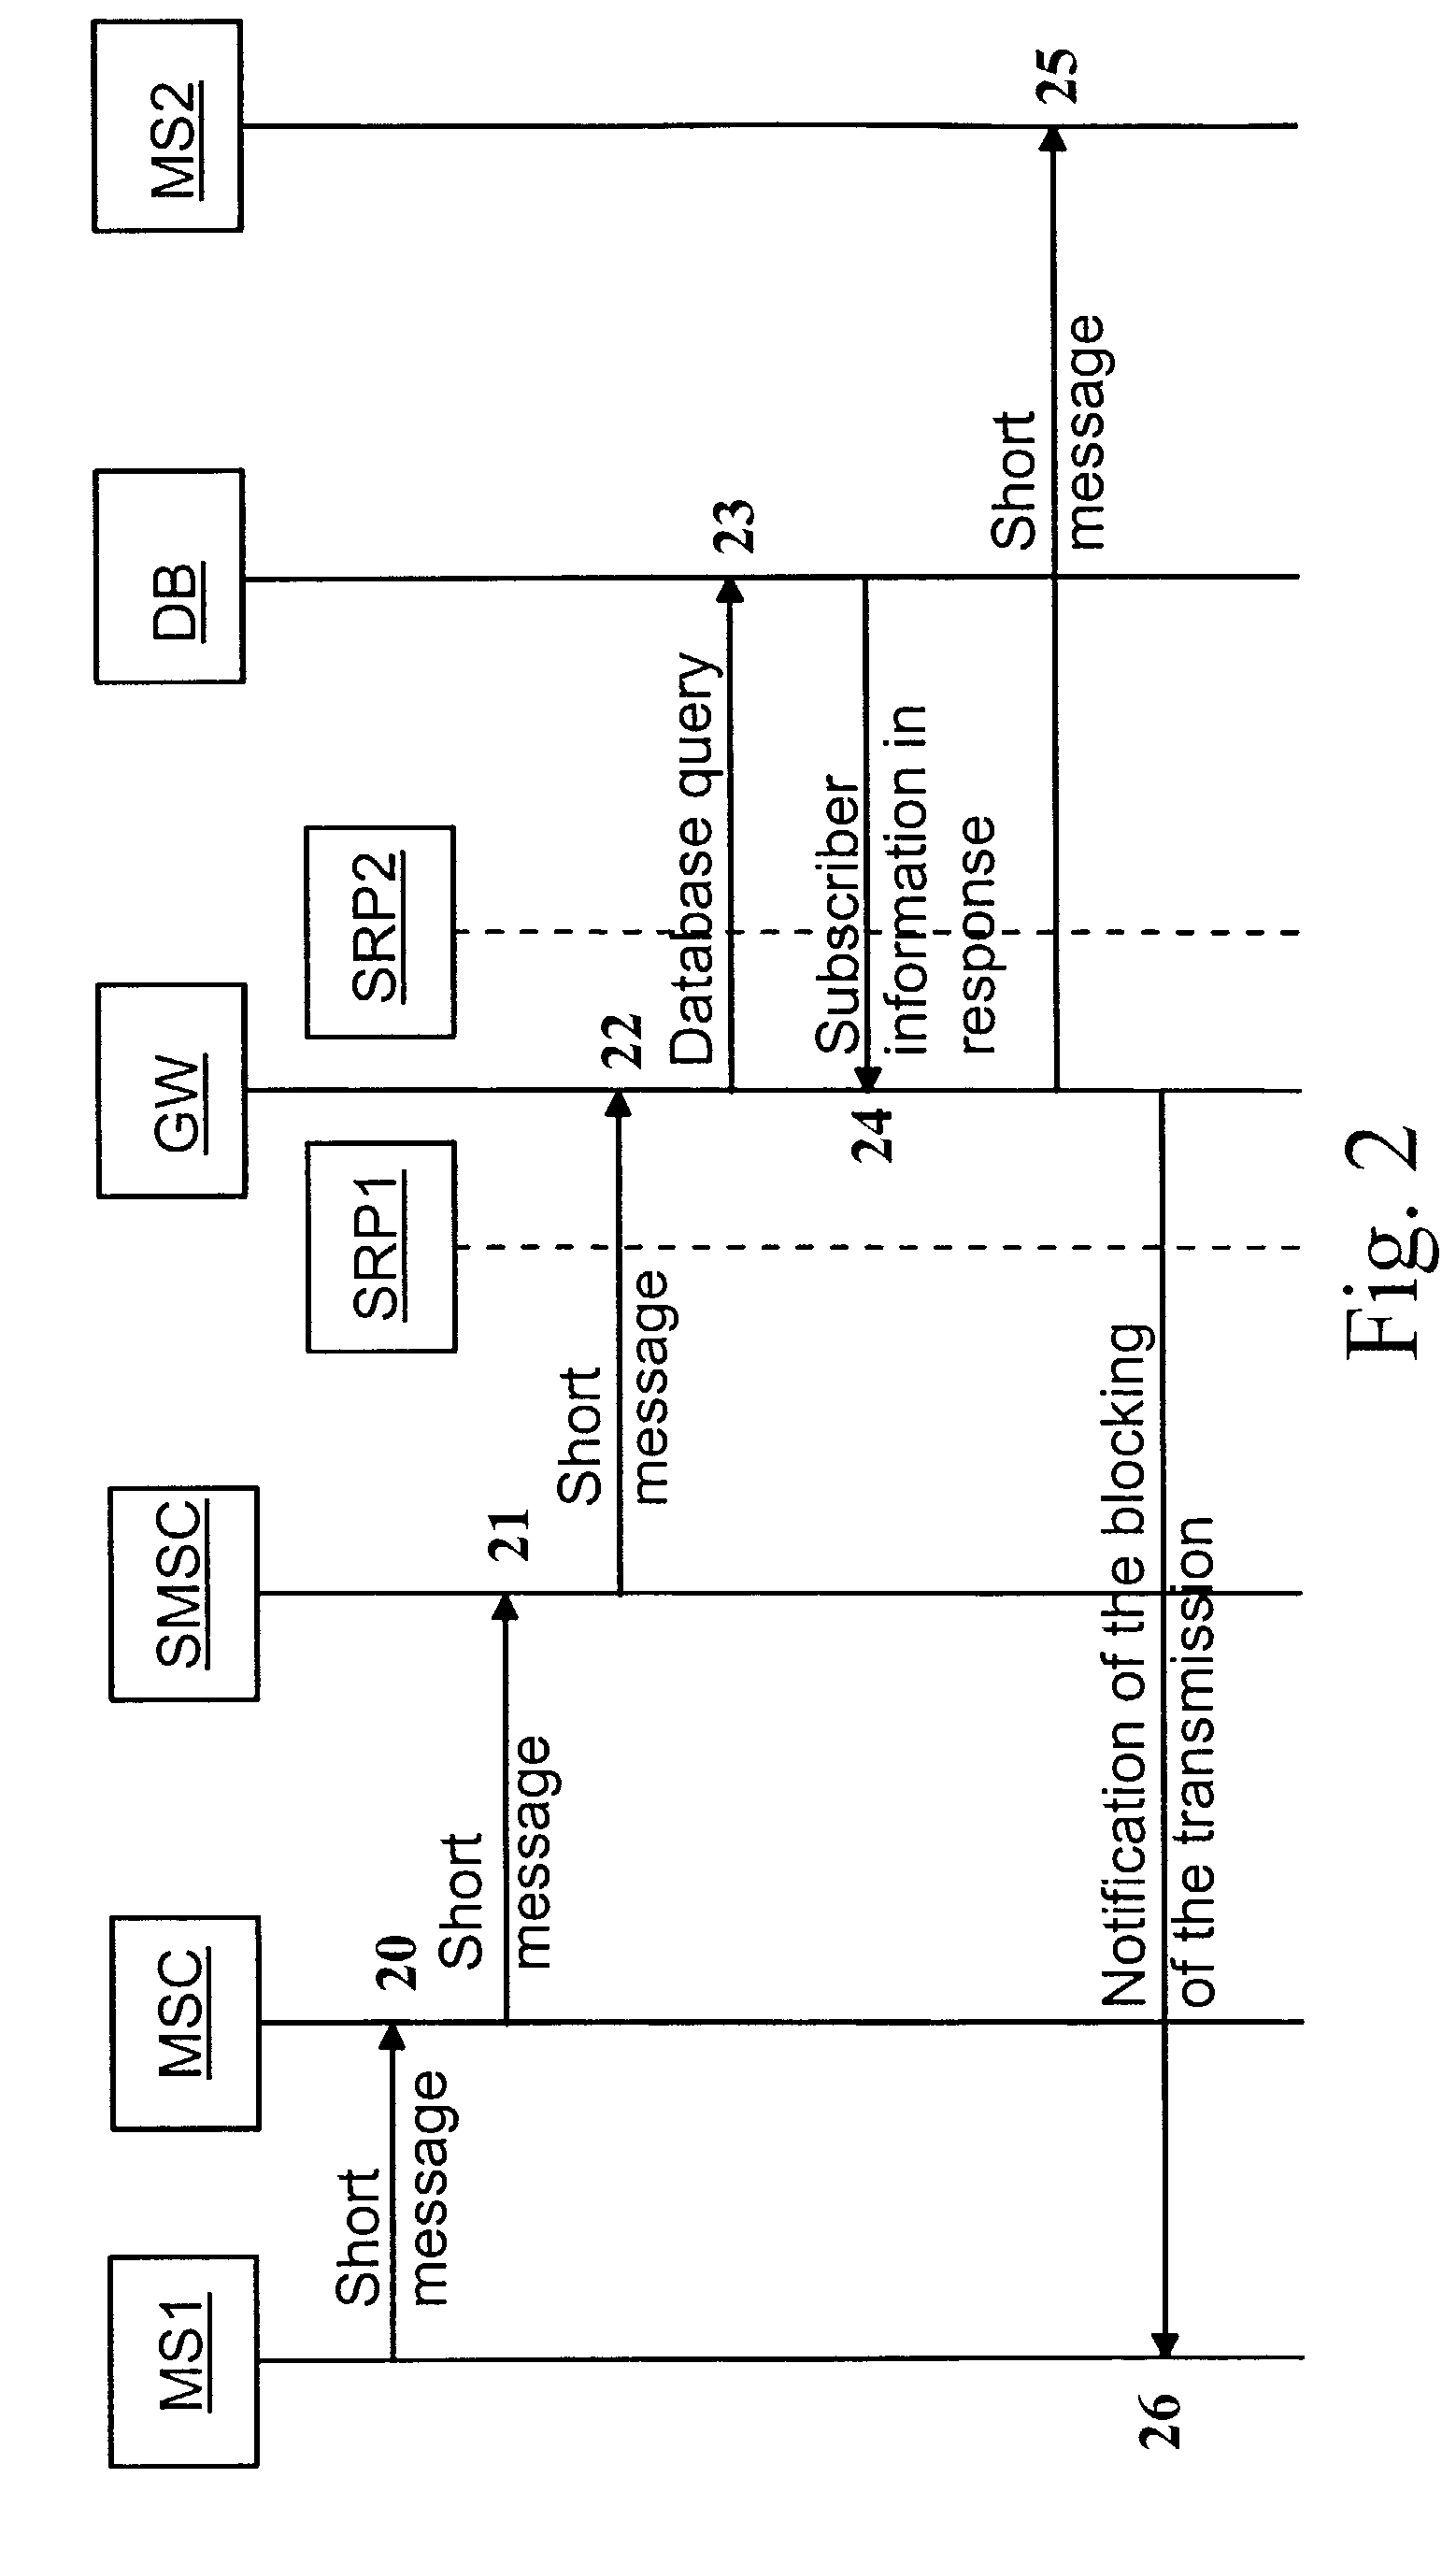 System and method for blocking the use of a service in a telecommunication system